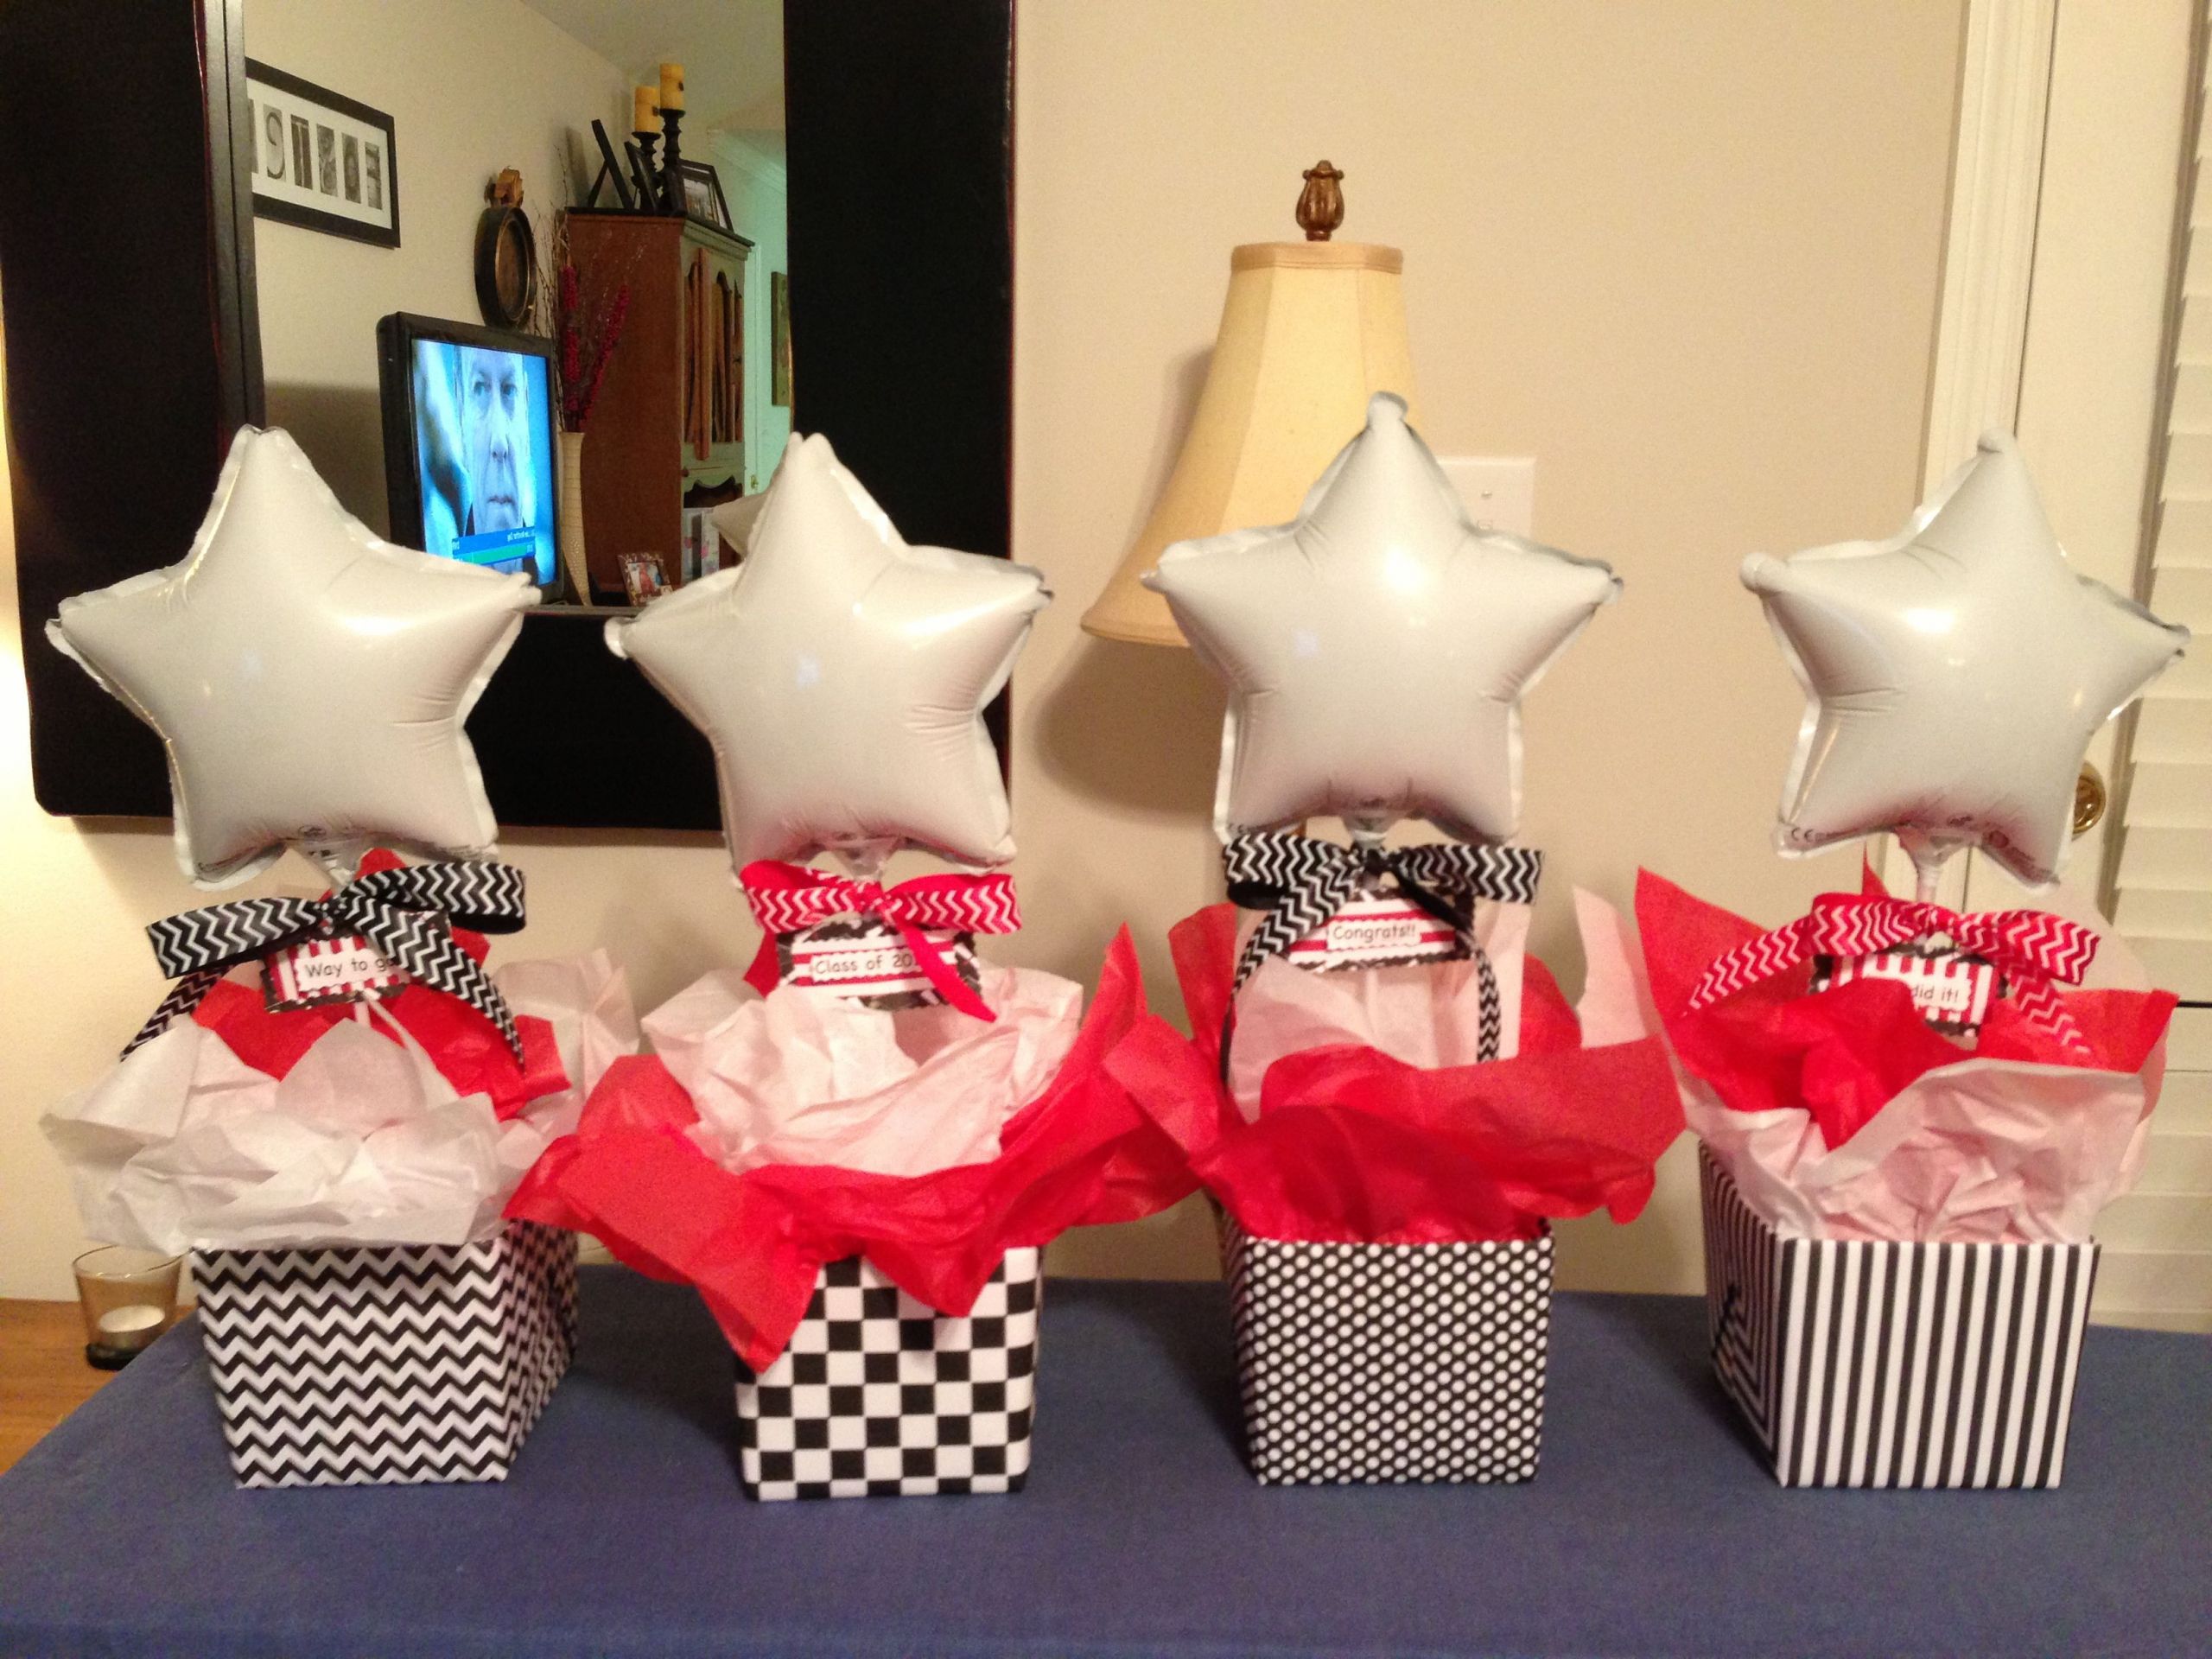 Red And White Graduation Party Ideas
 Graduation decorations Red black and white